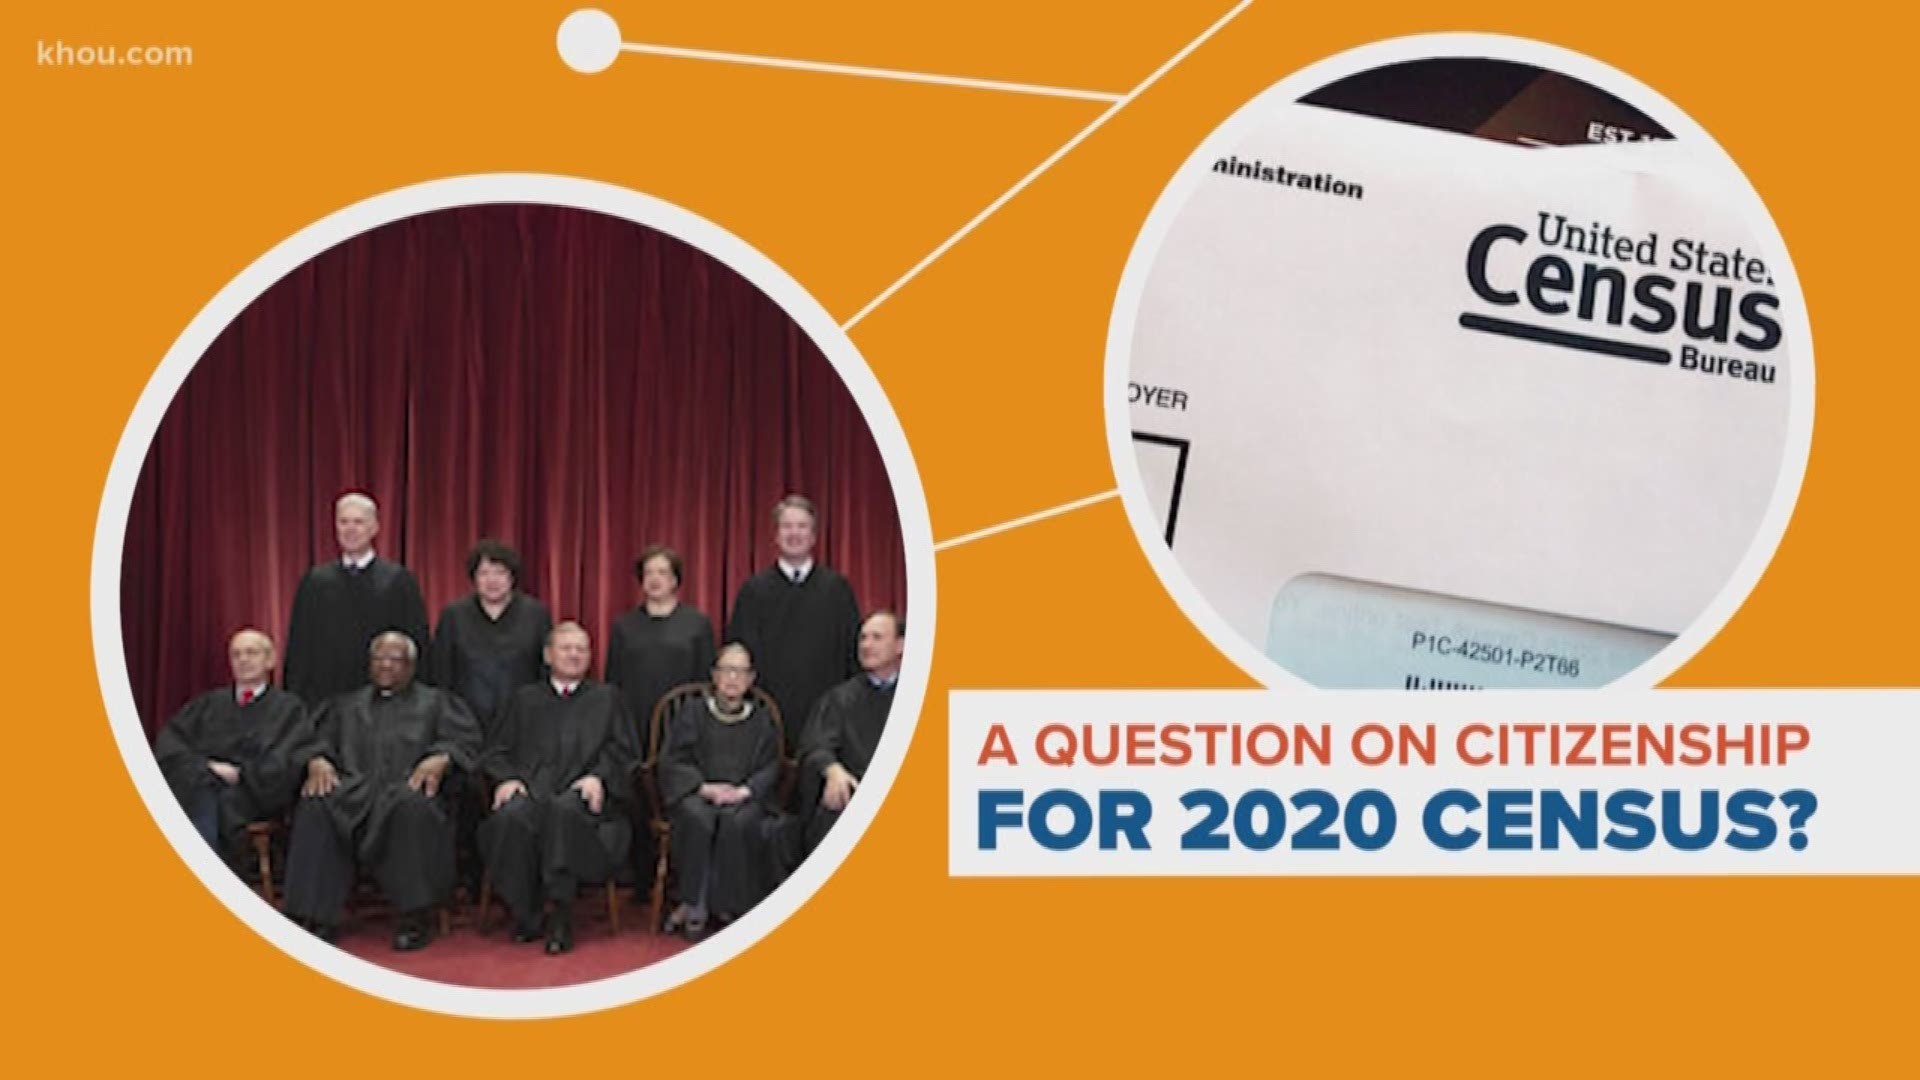 Next year, Americans will fill-out the census questionnaire. We do this every 10 years so the government can count how many people are here. But today, the Supreme Court will decide whether one question will be on it. Our Stephanie Whitfield connects the dots.